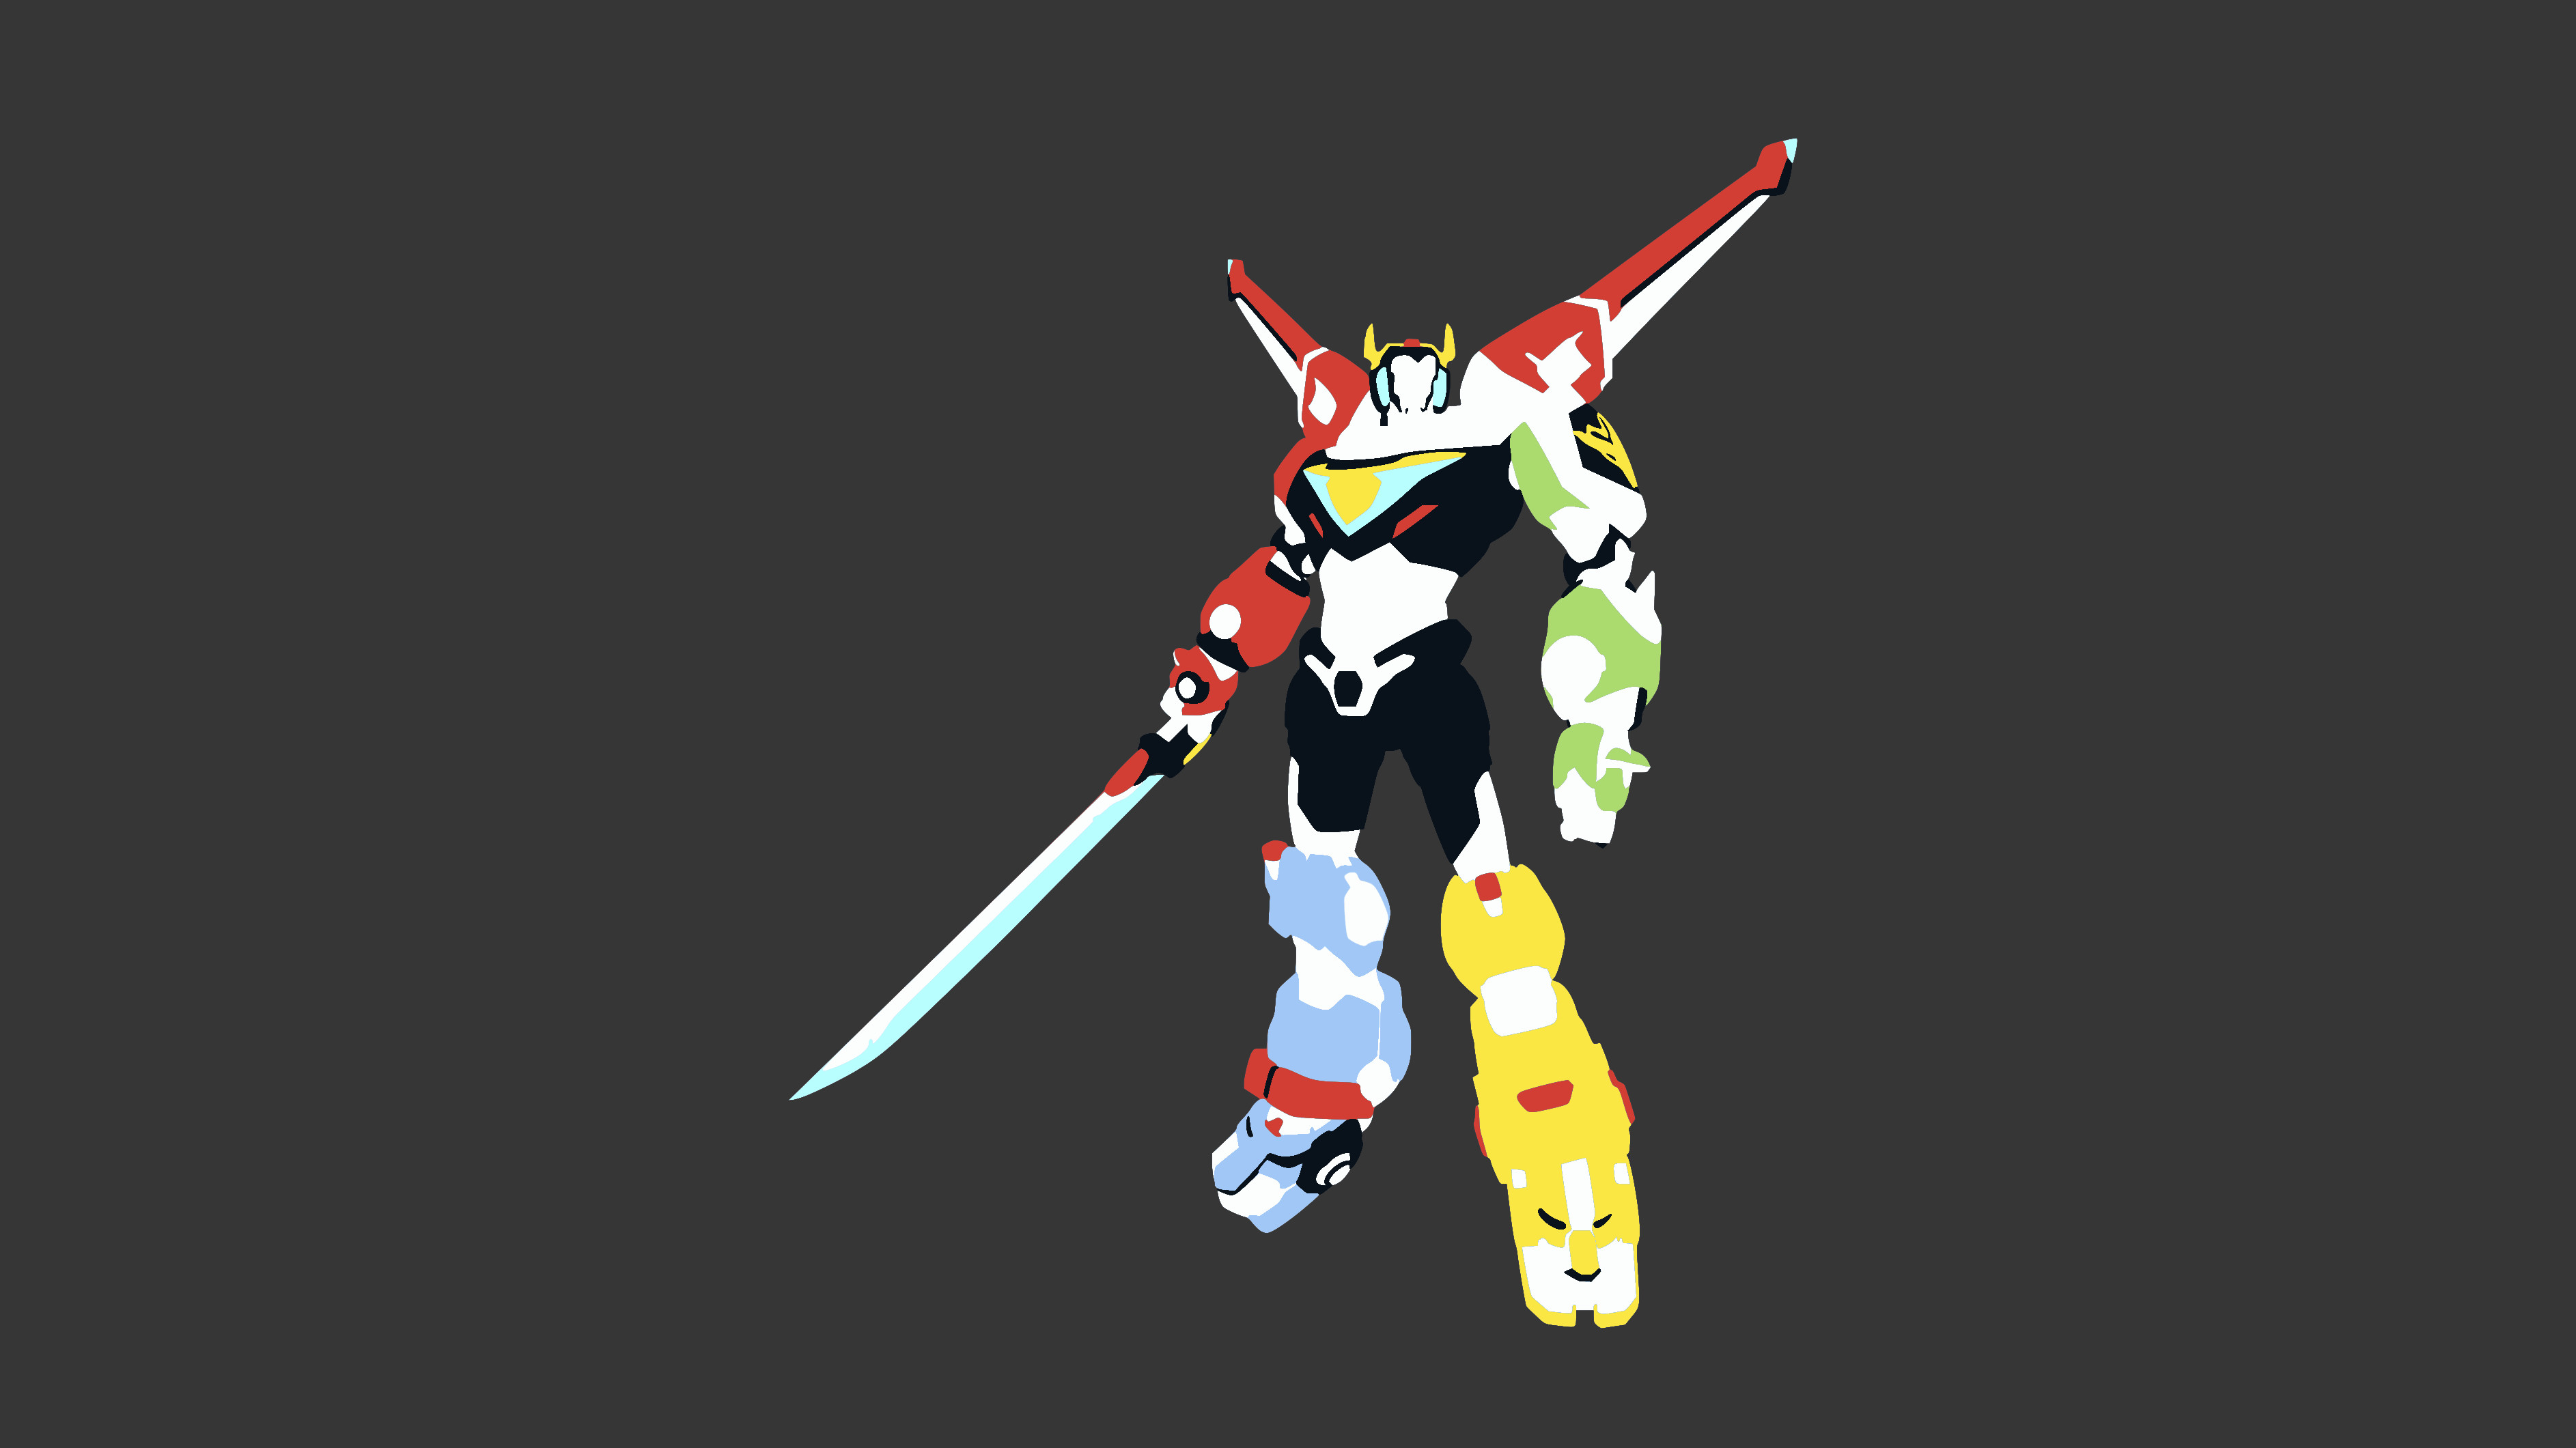 Voltron Minimalist Wallpaper Gray Background by DamionMauville